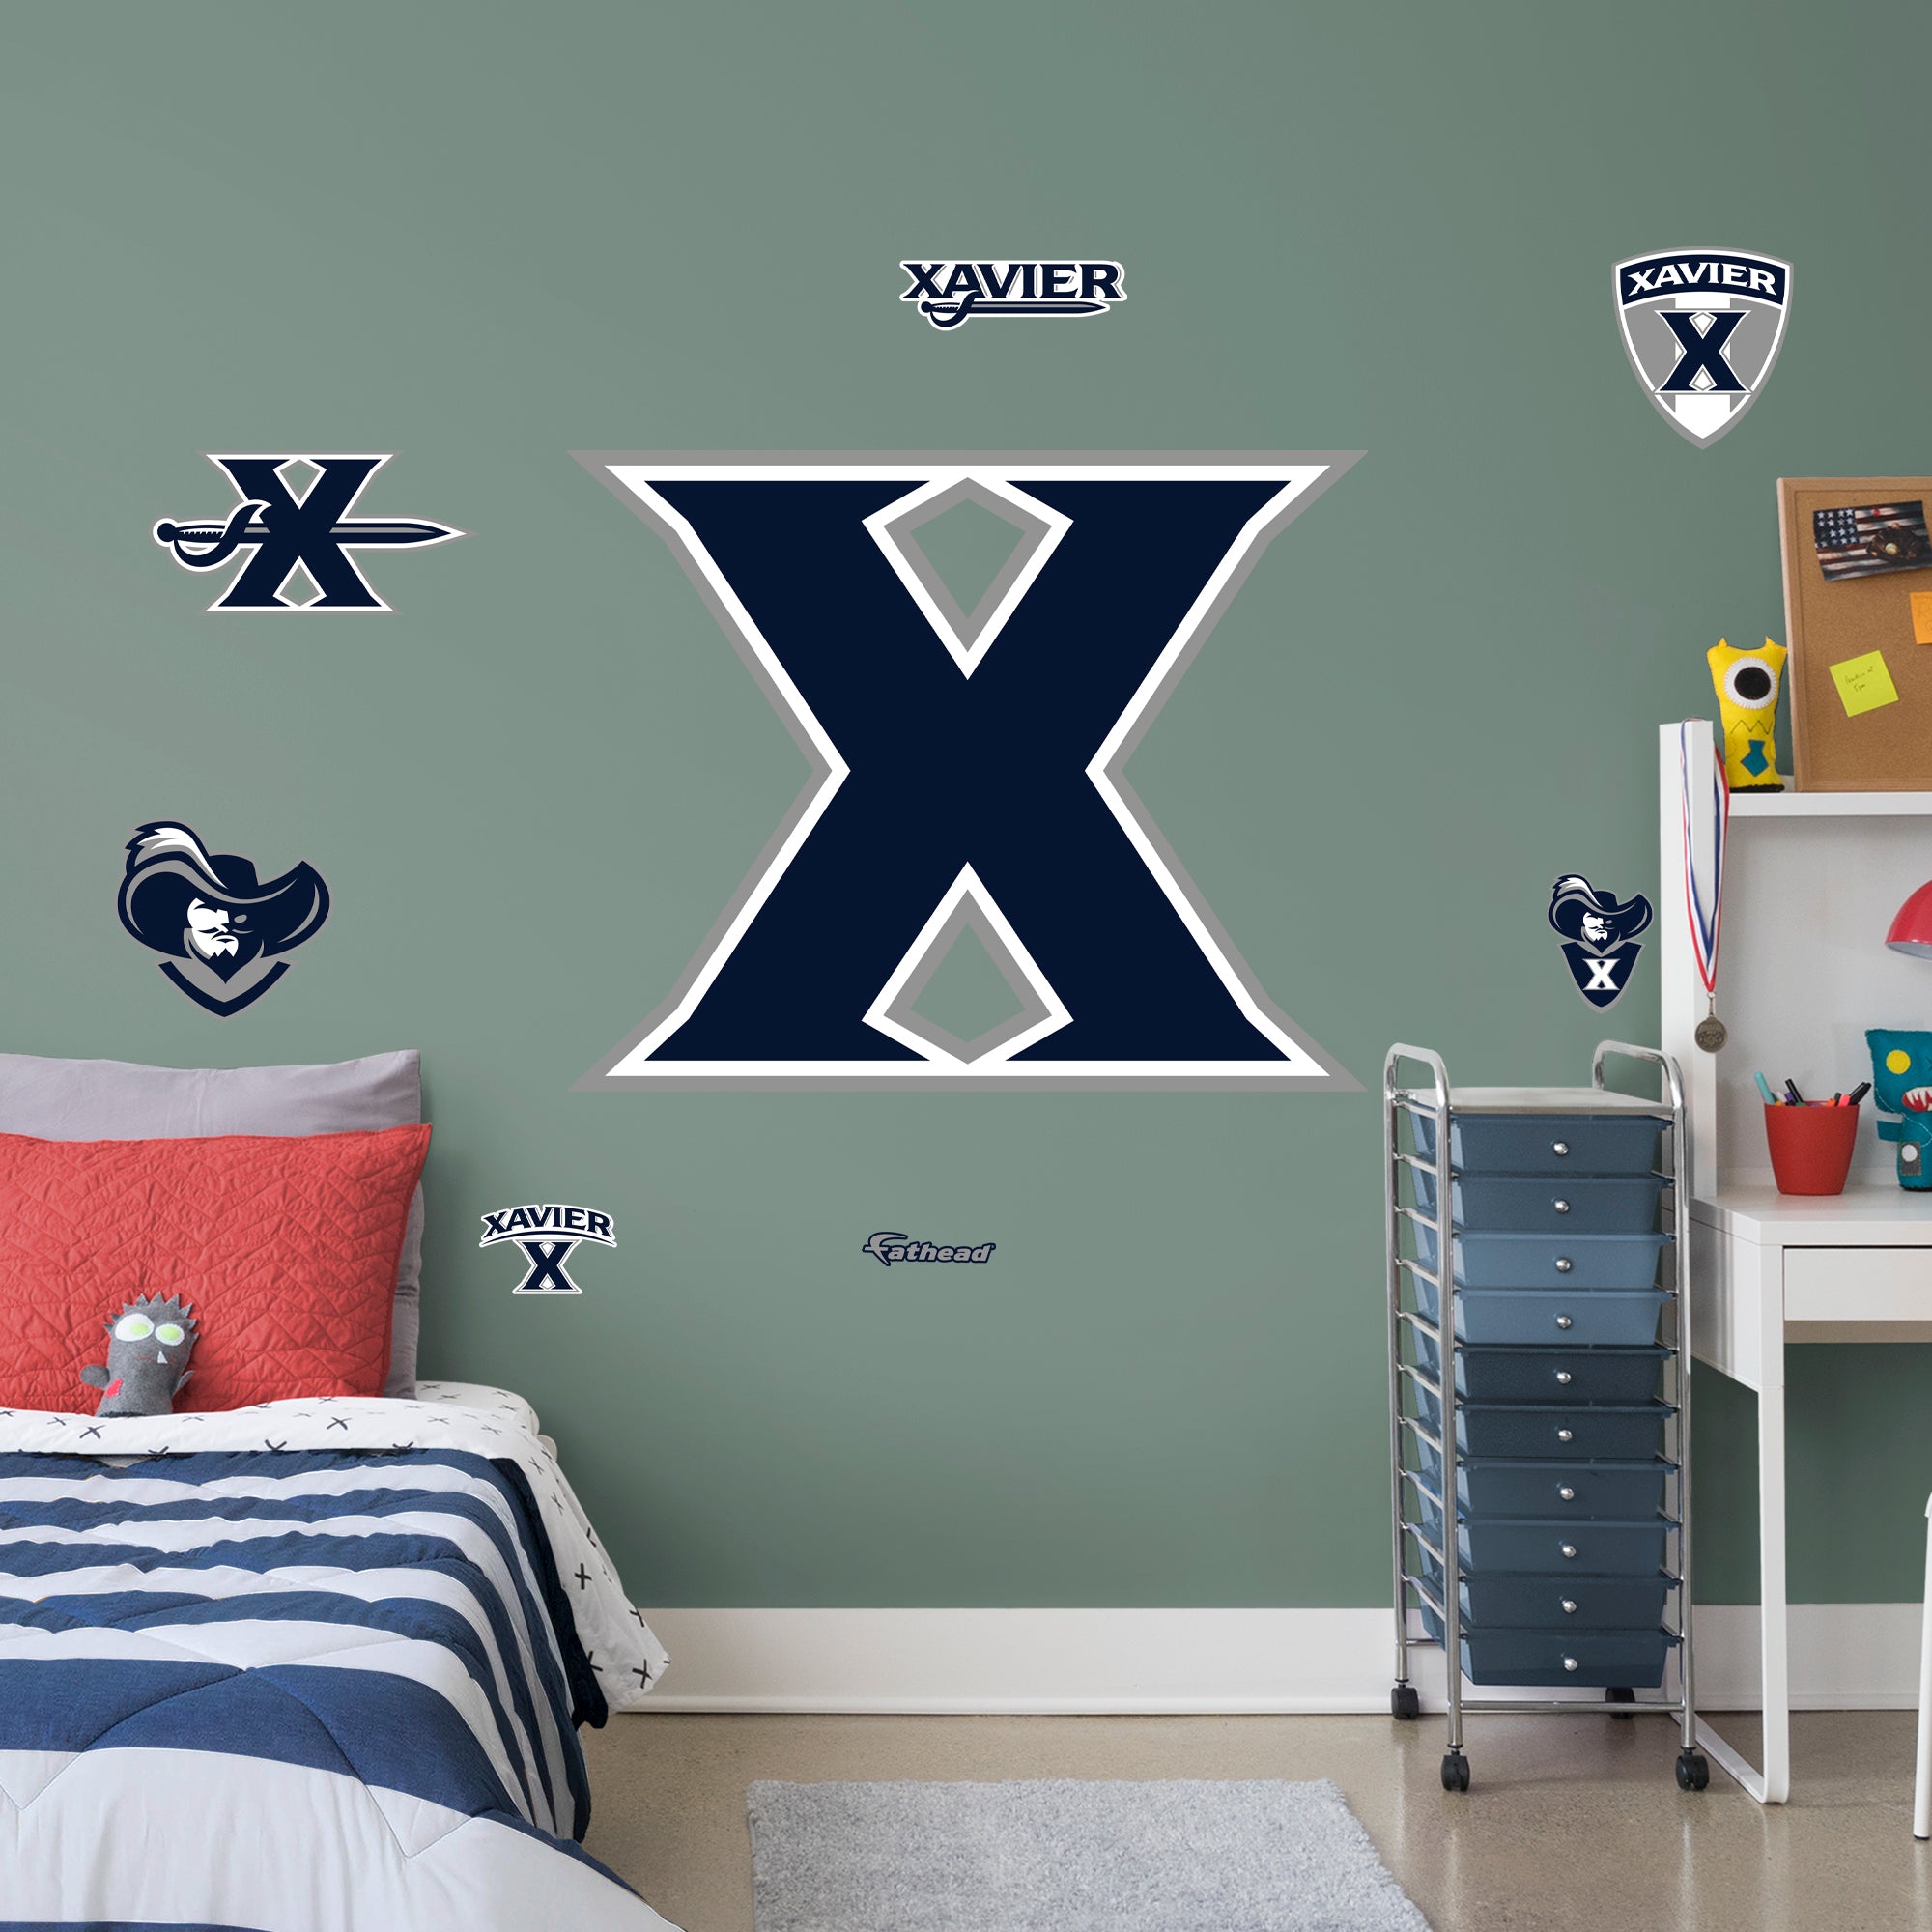 Xavier Musketeers 2020 RealBig Logo - Officially Licensed NCAA Removable Wall Decal Giant Decal (45"W x 36"H) by Fathead | Vinyl